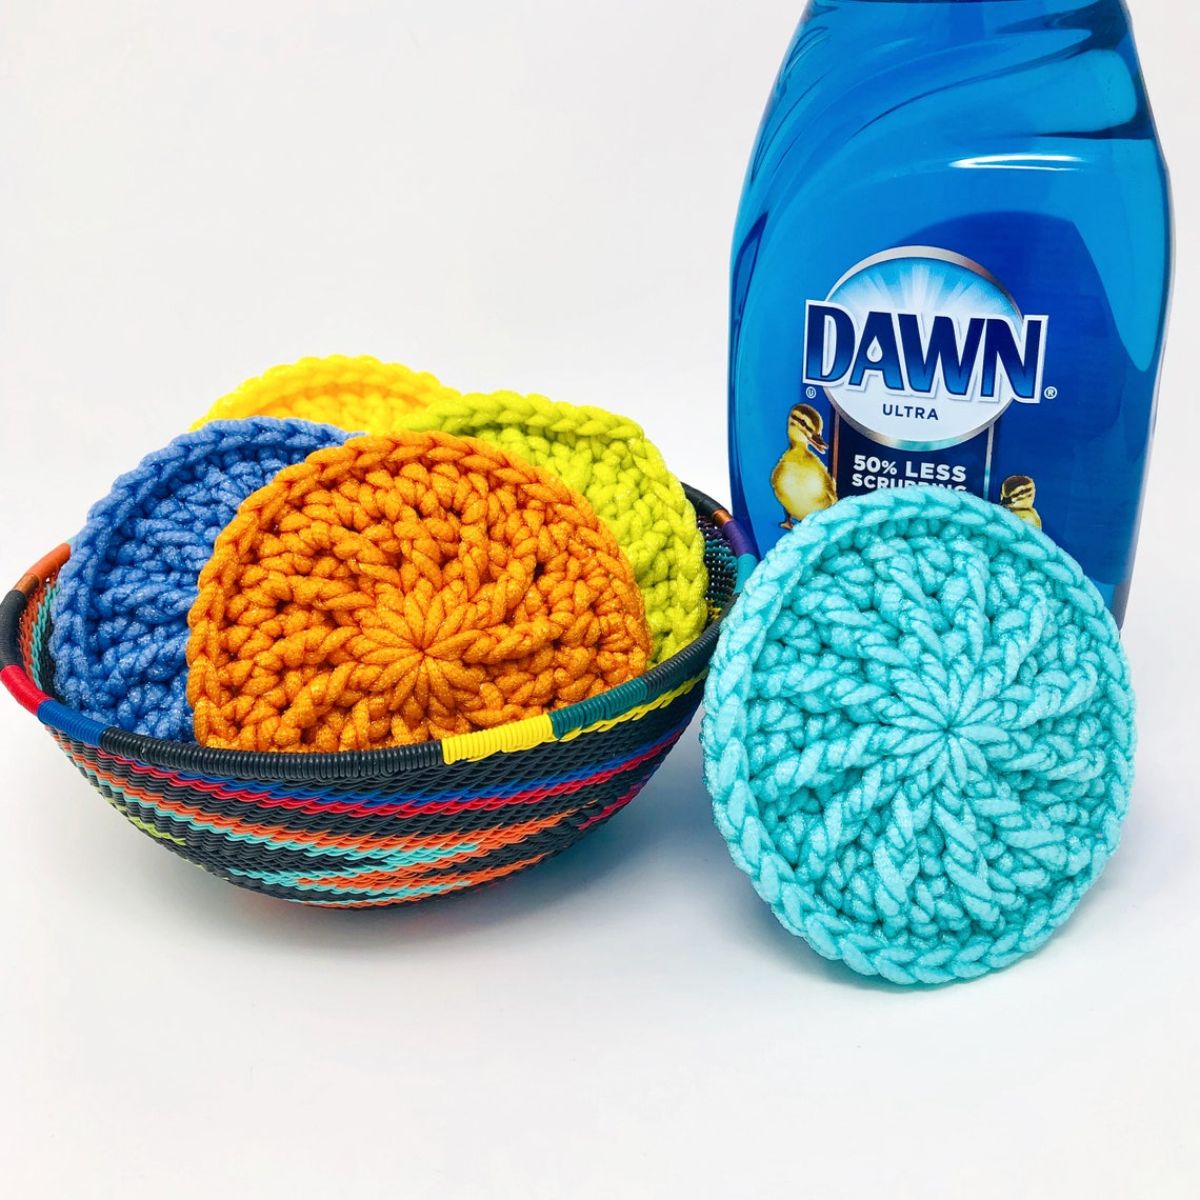 A basket filled with orange, green, yellow, and blue round crochet scrubbies next to an aqua scrubbie and a bottle of dish soap.